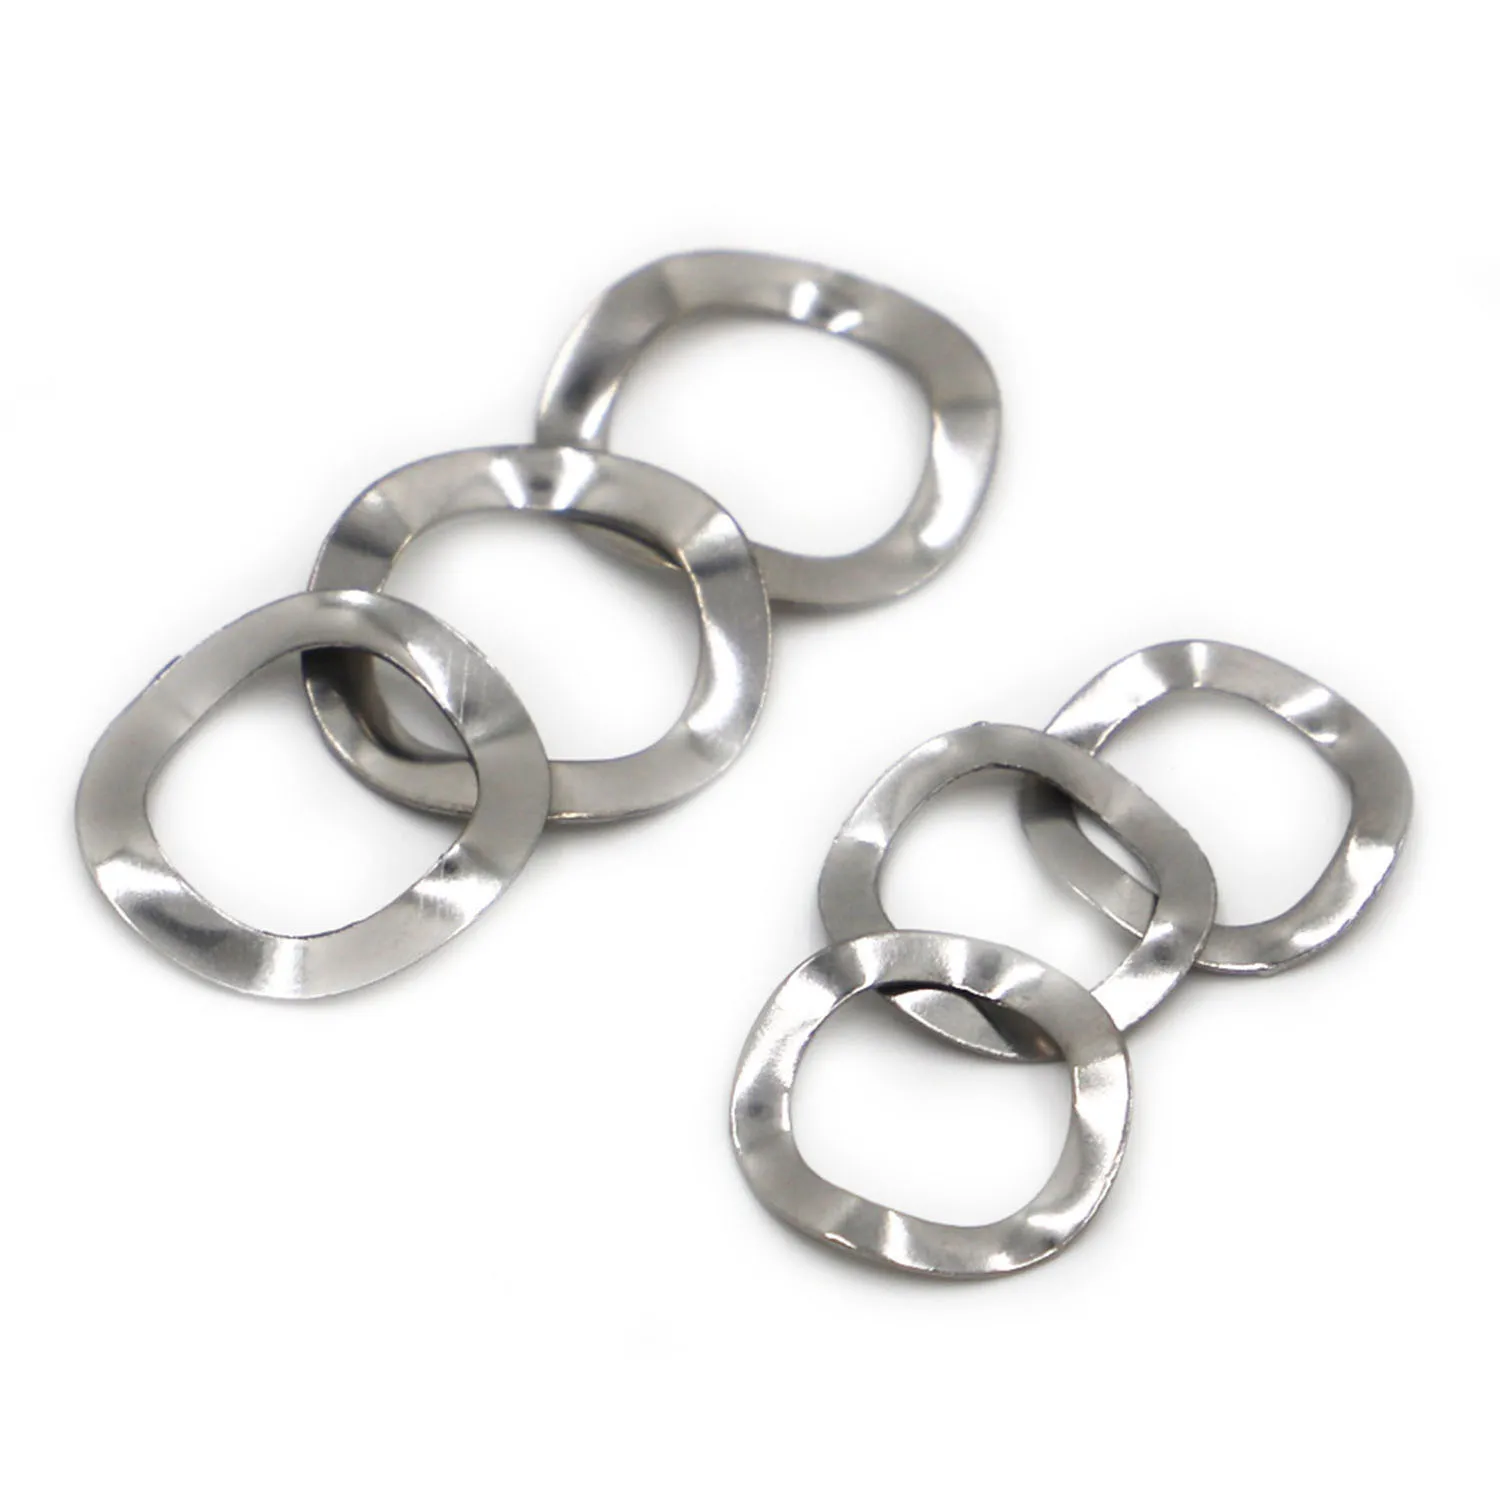 

304 Stainless Steel Three Wave Washers Spring Washer M3 M4 M5 M6 M8 M10 M12 M14 M16 M19 M23 M25 M27 M31 M39 M41 M51